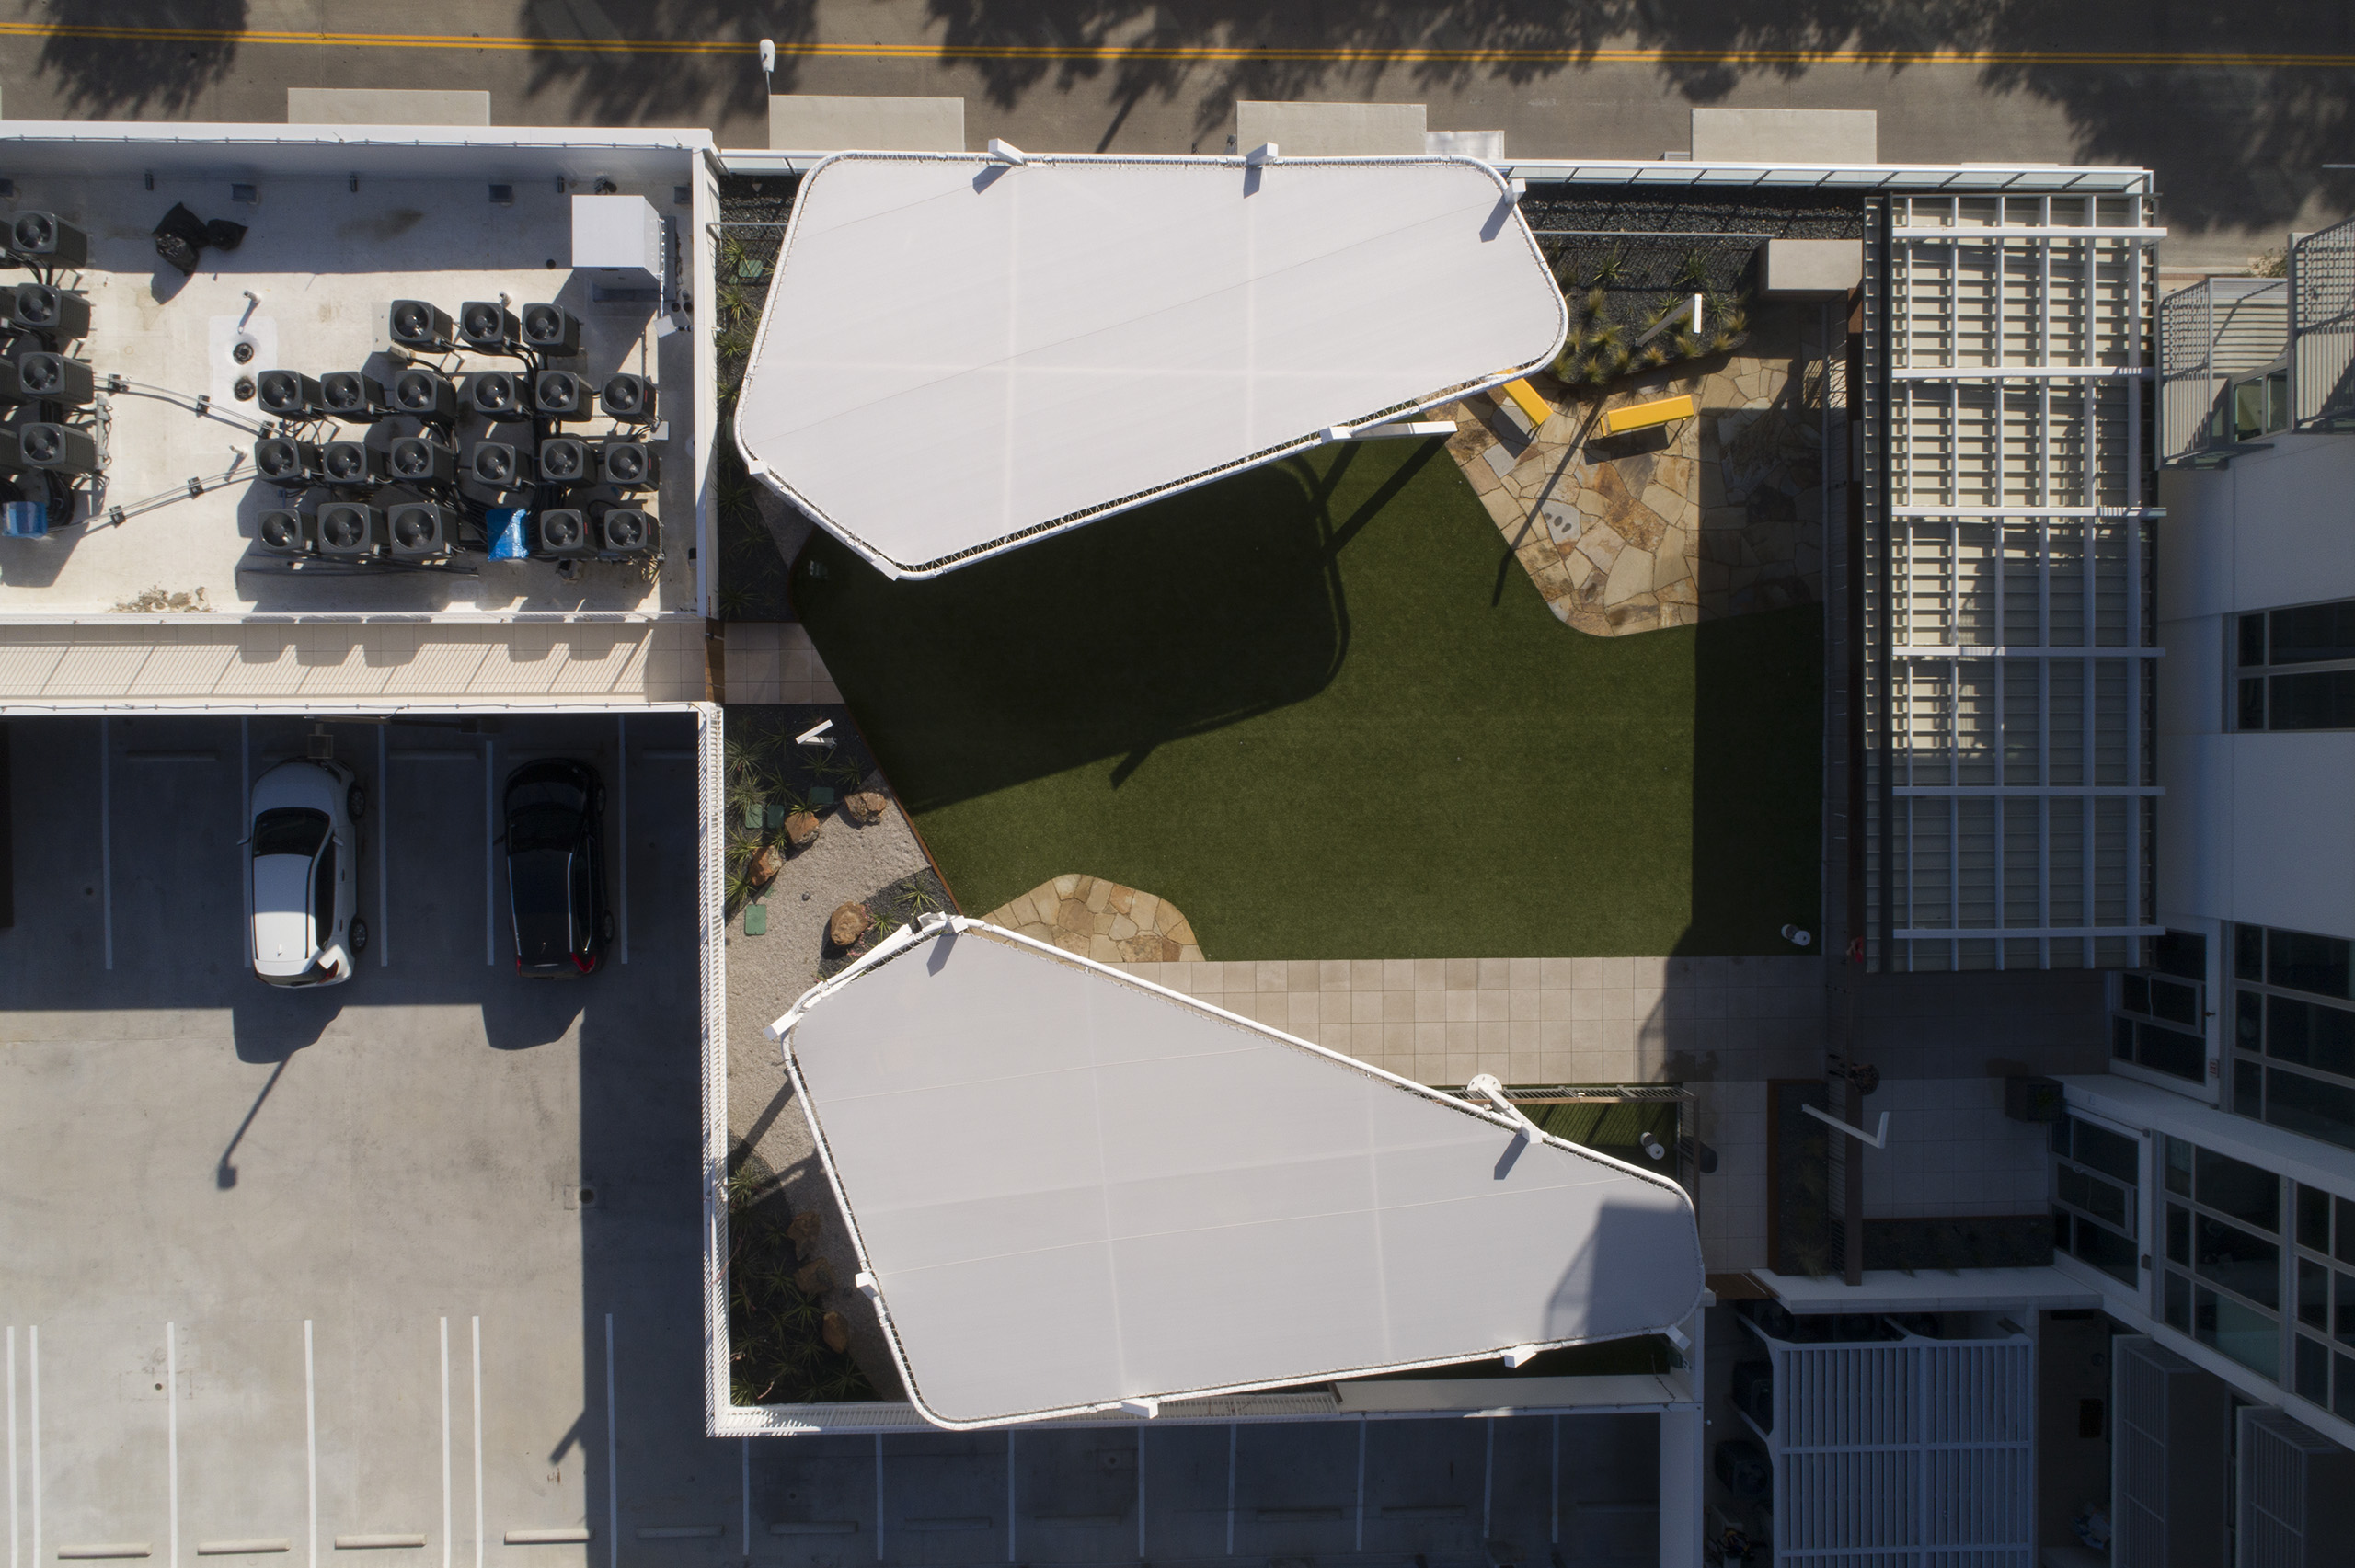 Overhead view of shade structure at Texas dog park